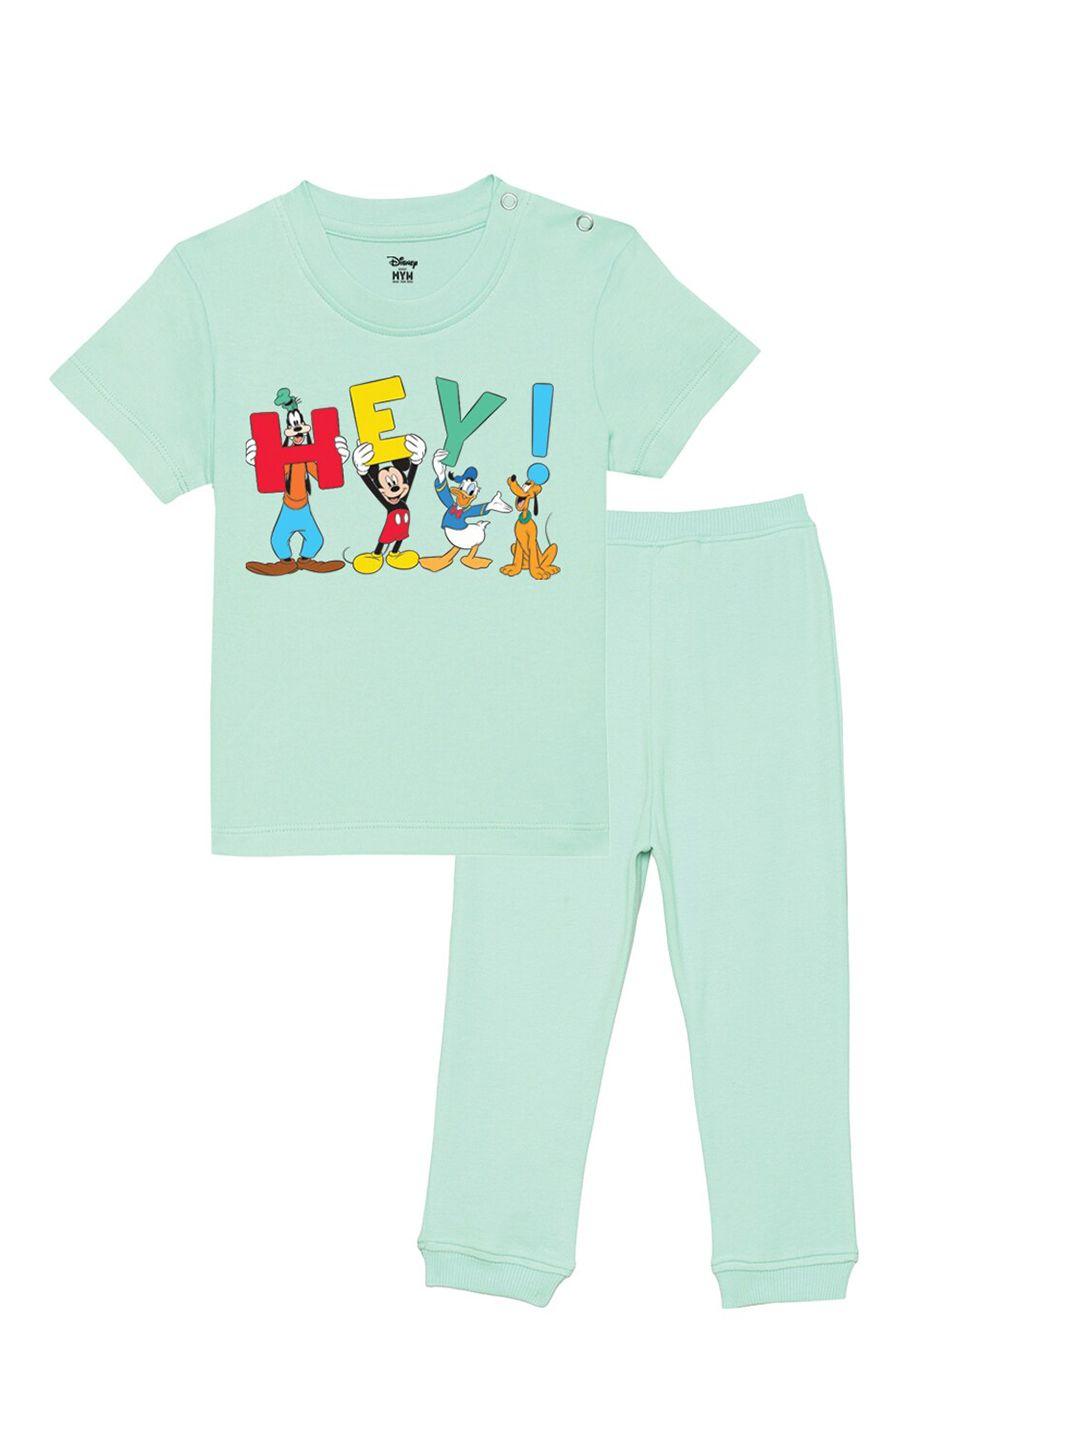 wear-your-mind-infants-boys-printed-t-shirt-with-trousers